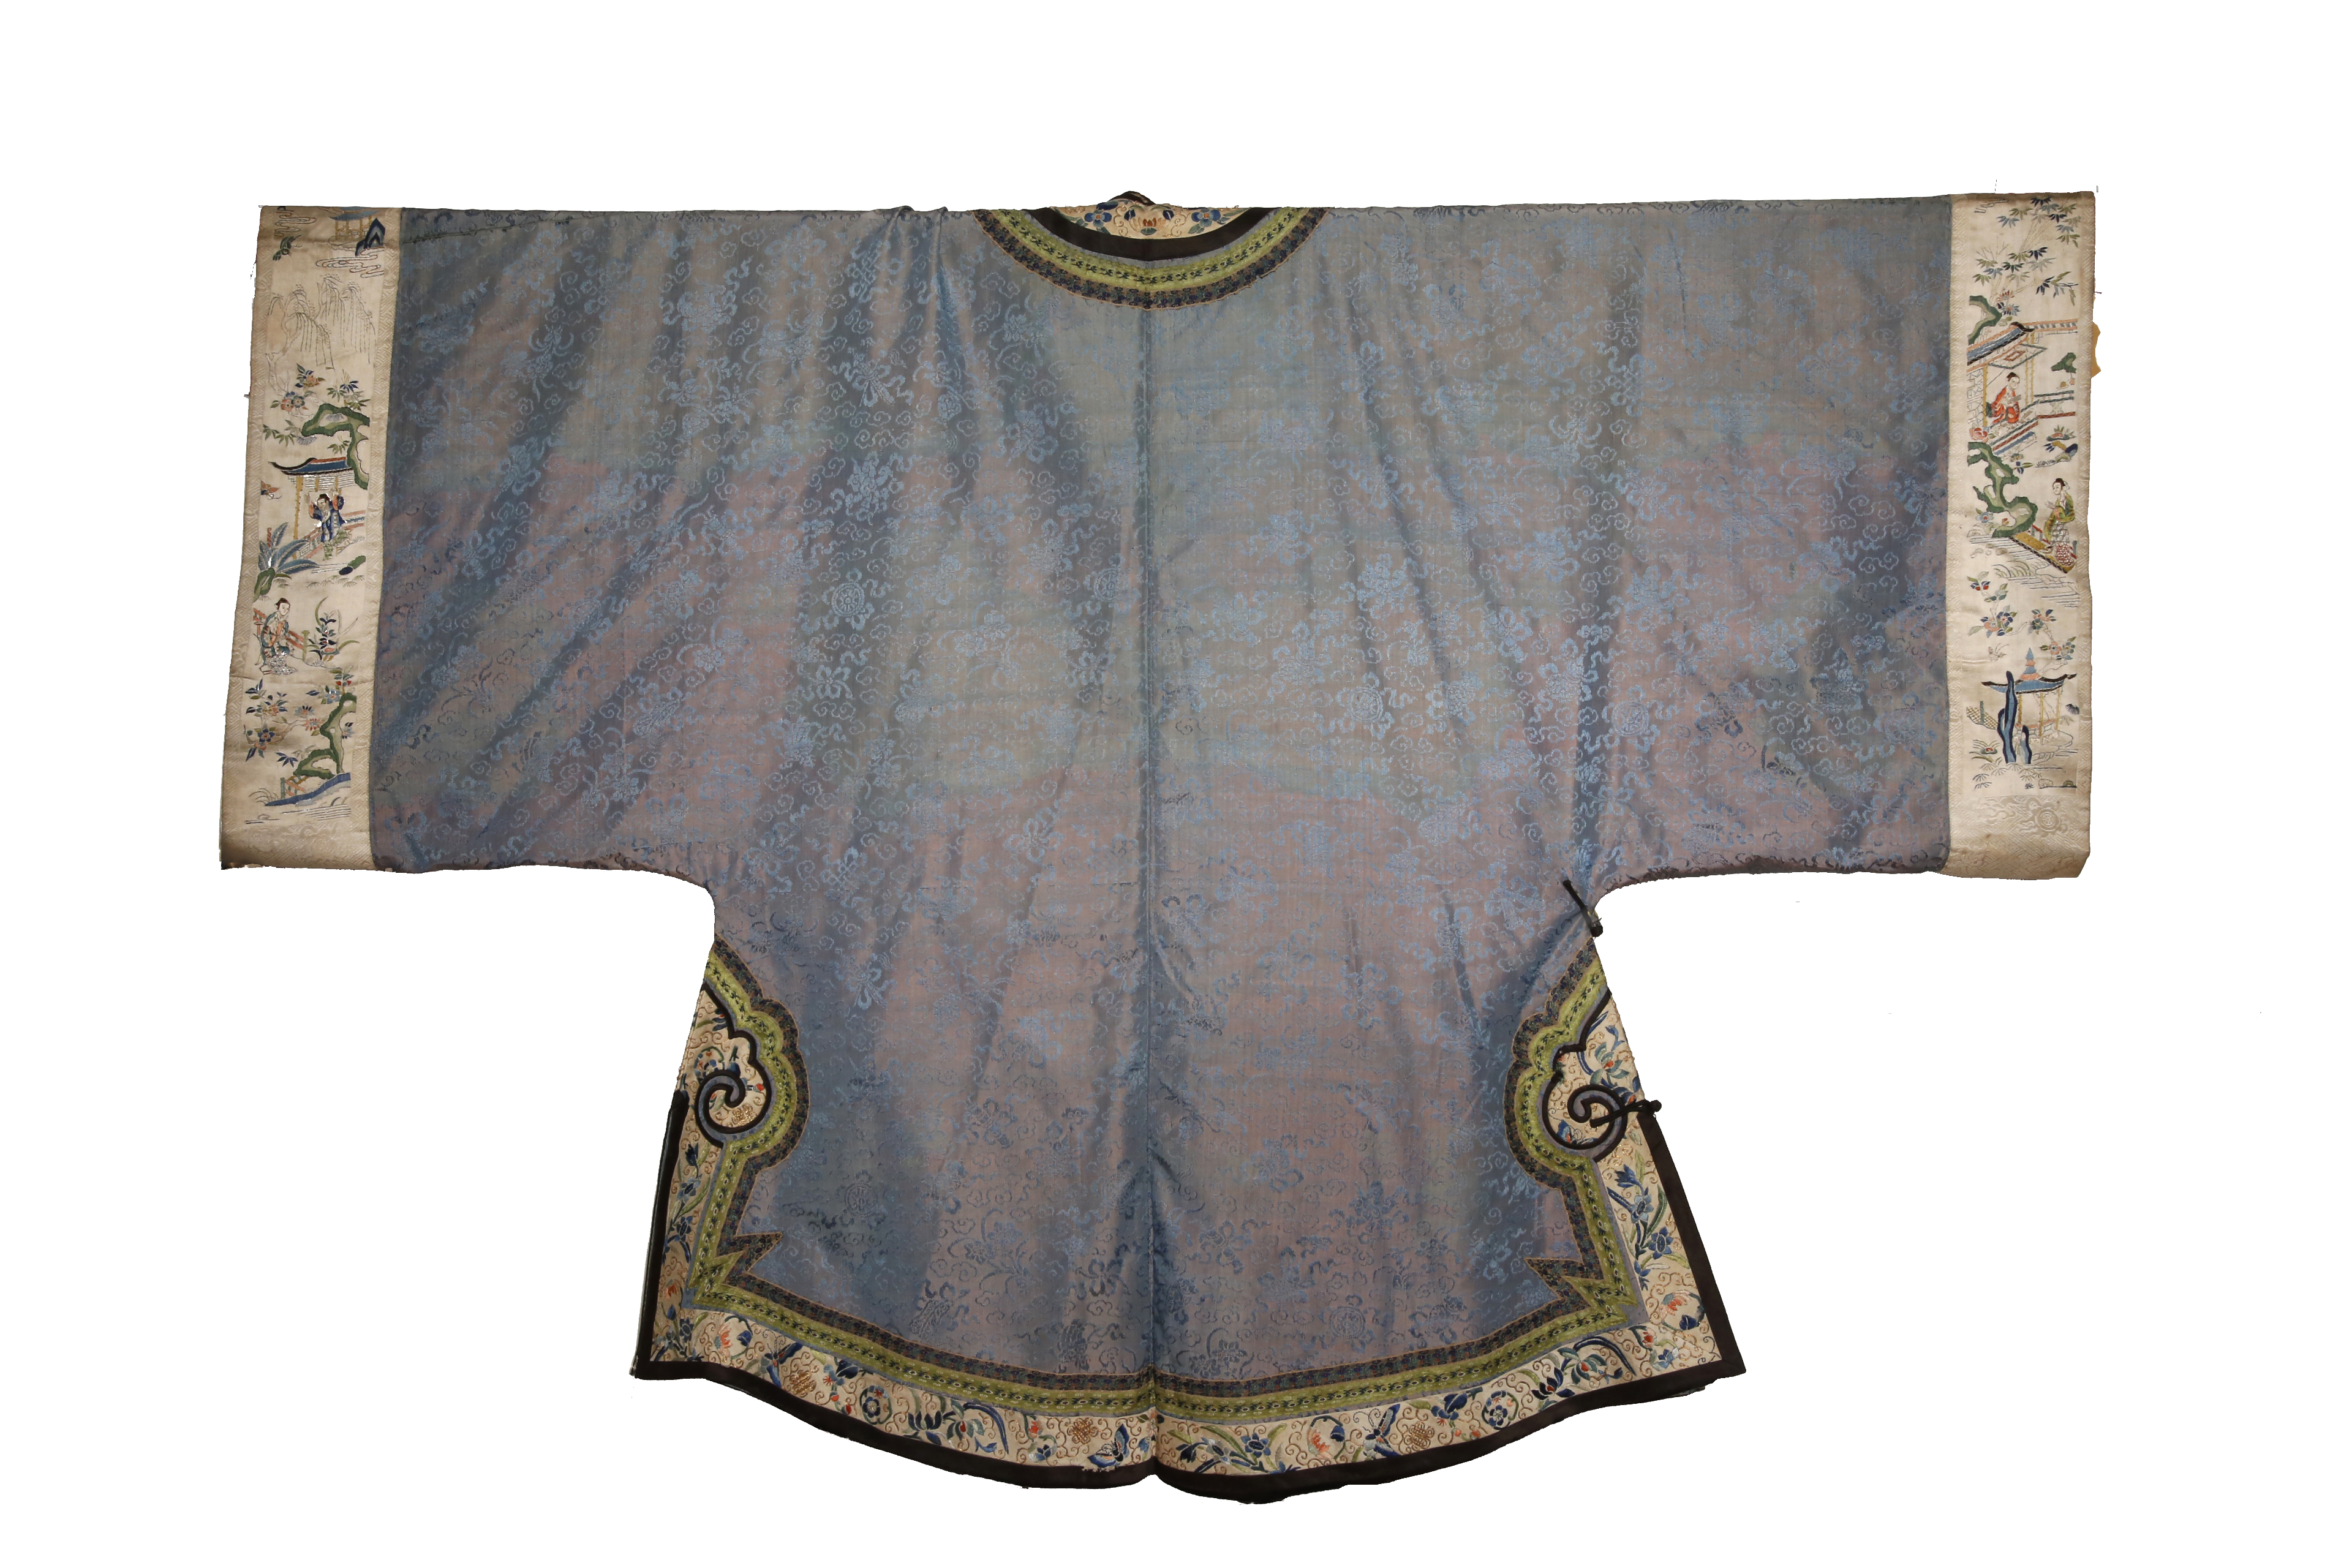 A CHINESE CORAL SILK SKIRT AND A BLUE SILK INFORMAL ROBE 19TH CENTURY Embroidered with couched - Image 3 of 3